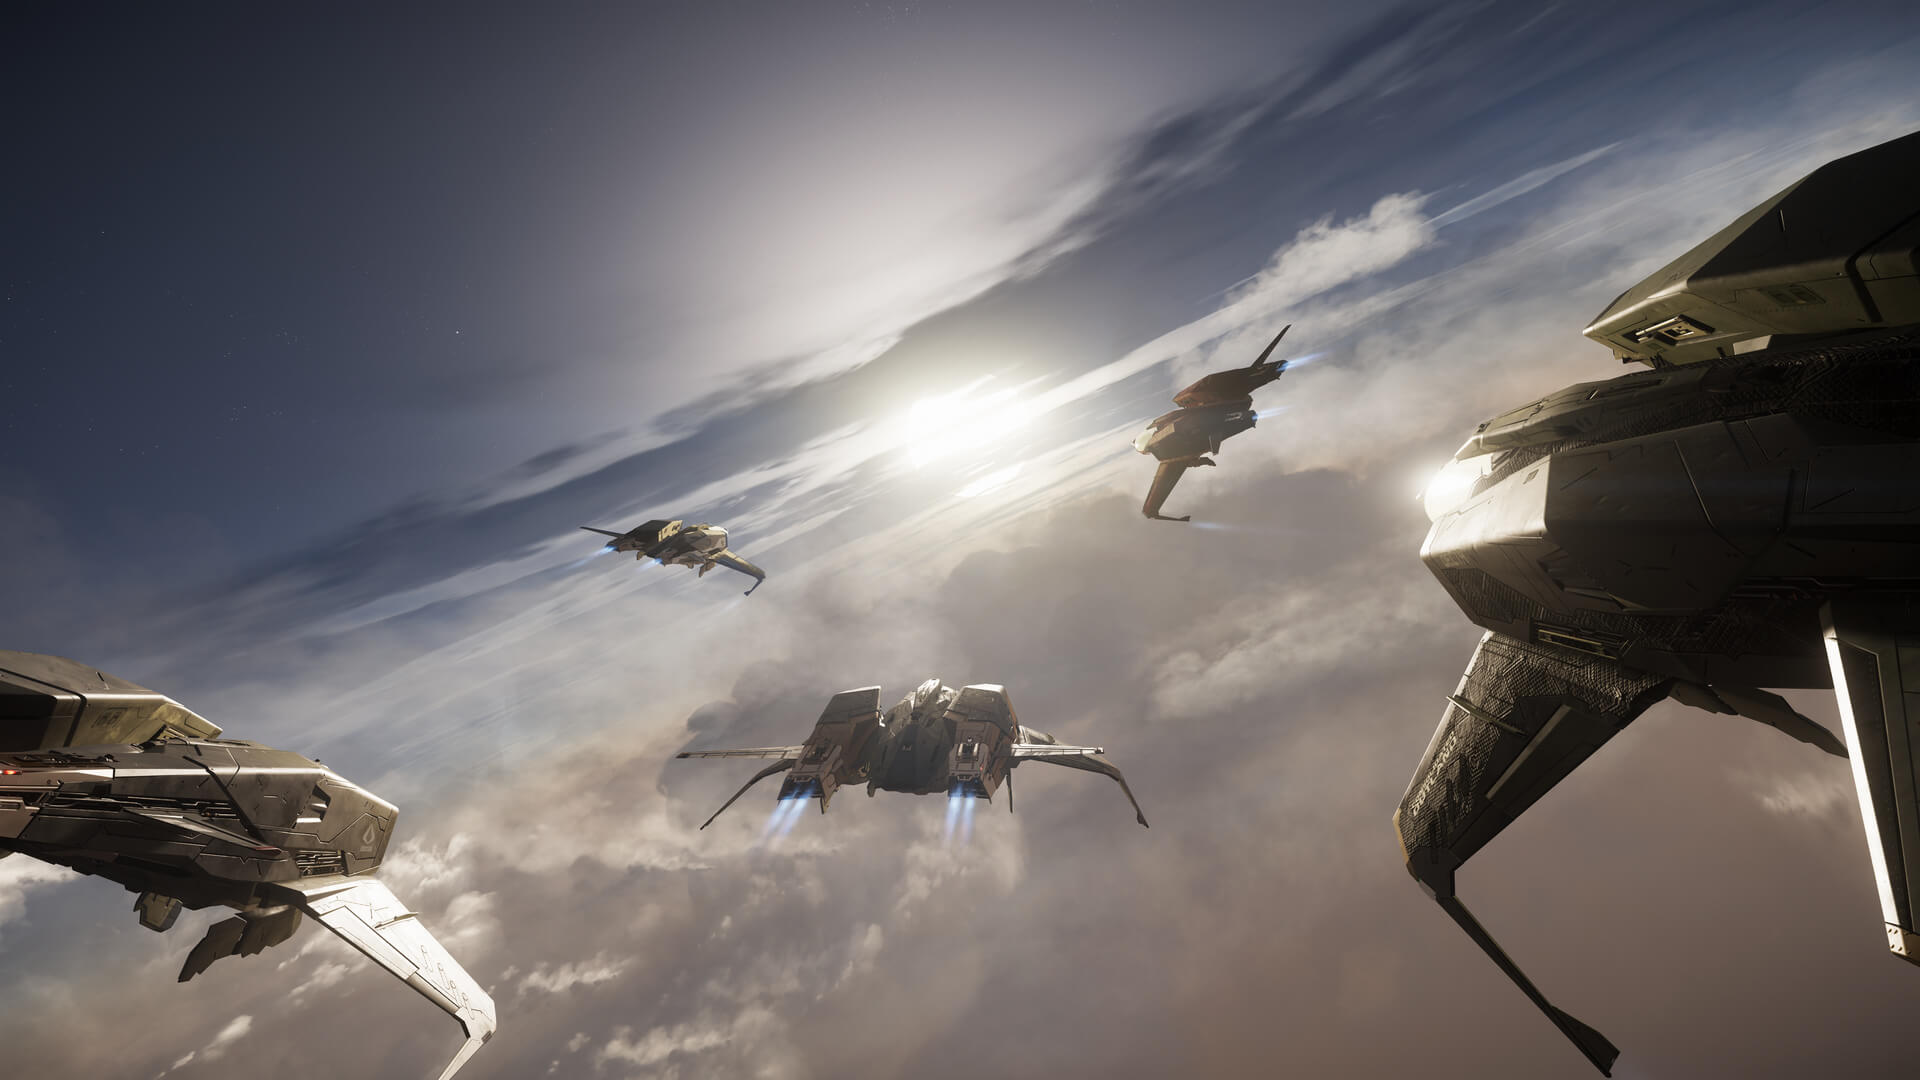 It's Free Fly Time again in Star Citizen for Invictus Launch Week